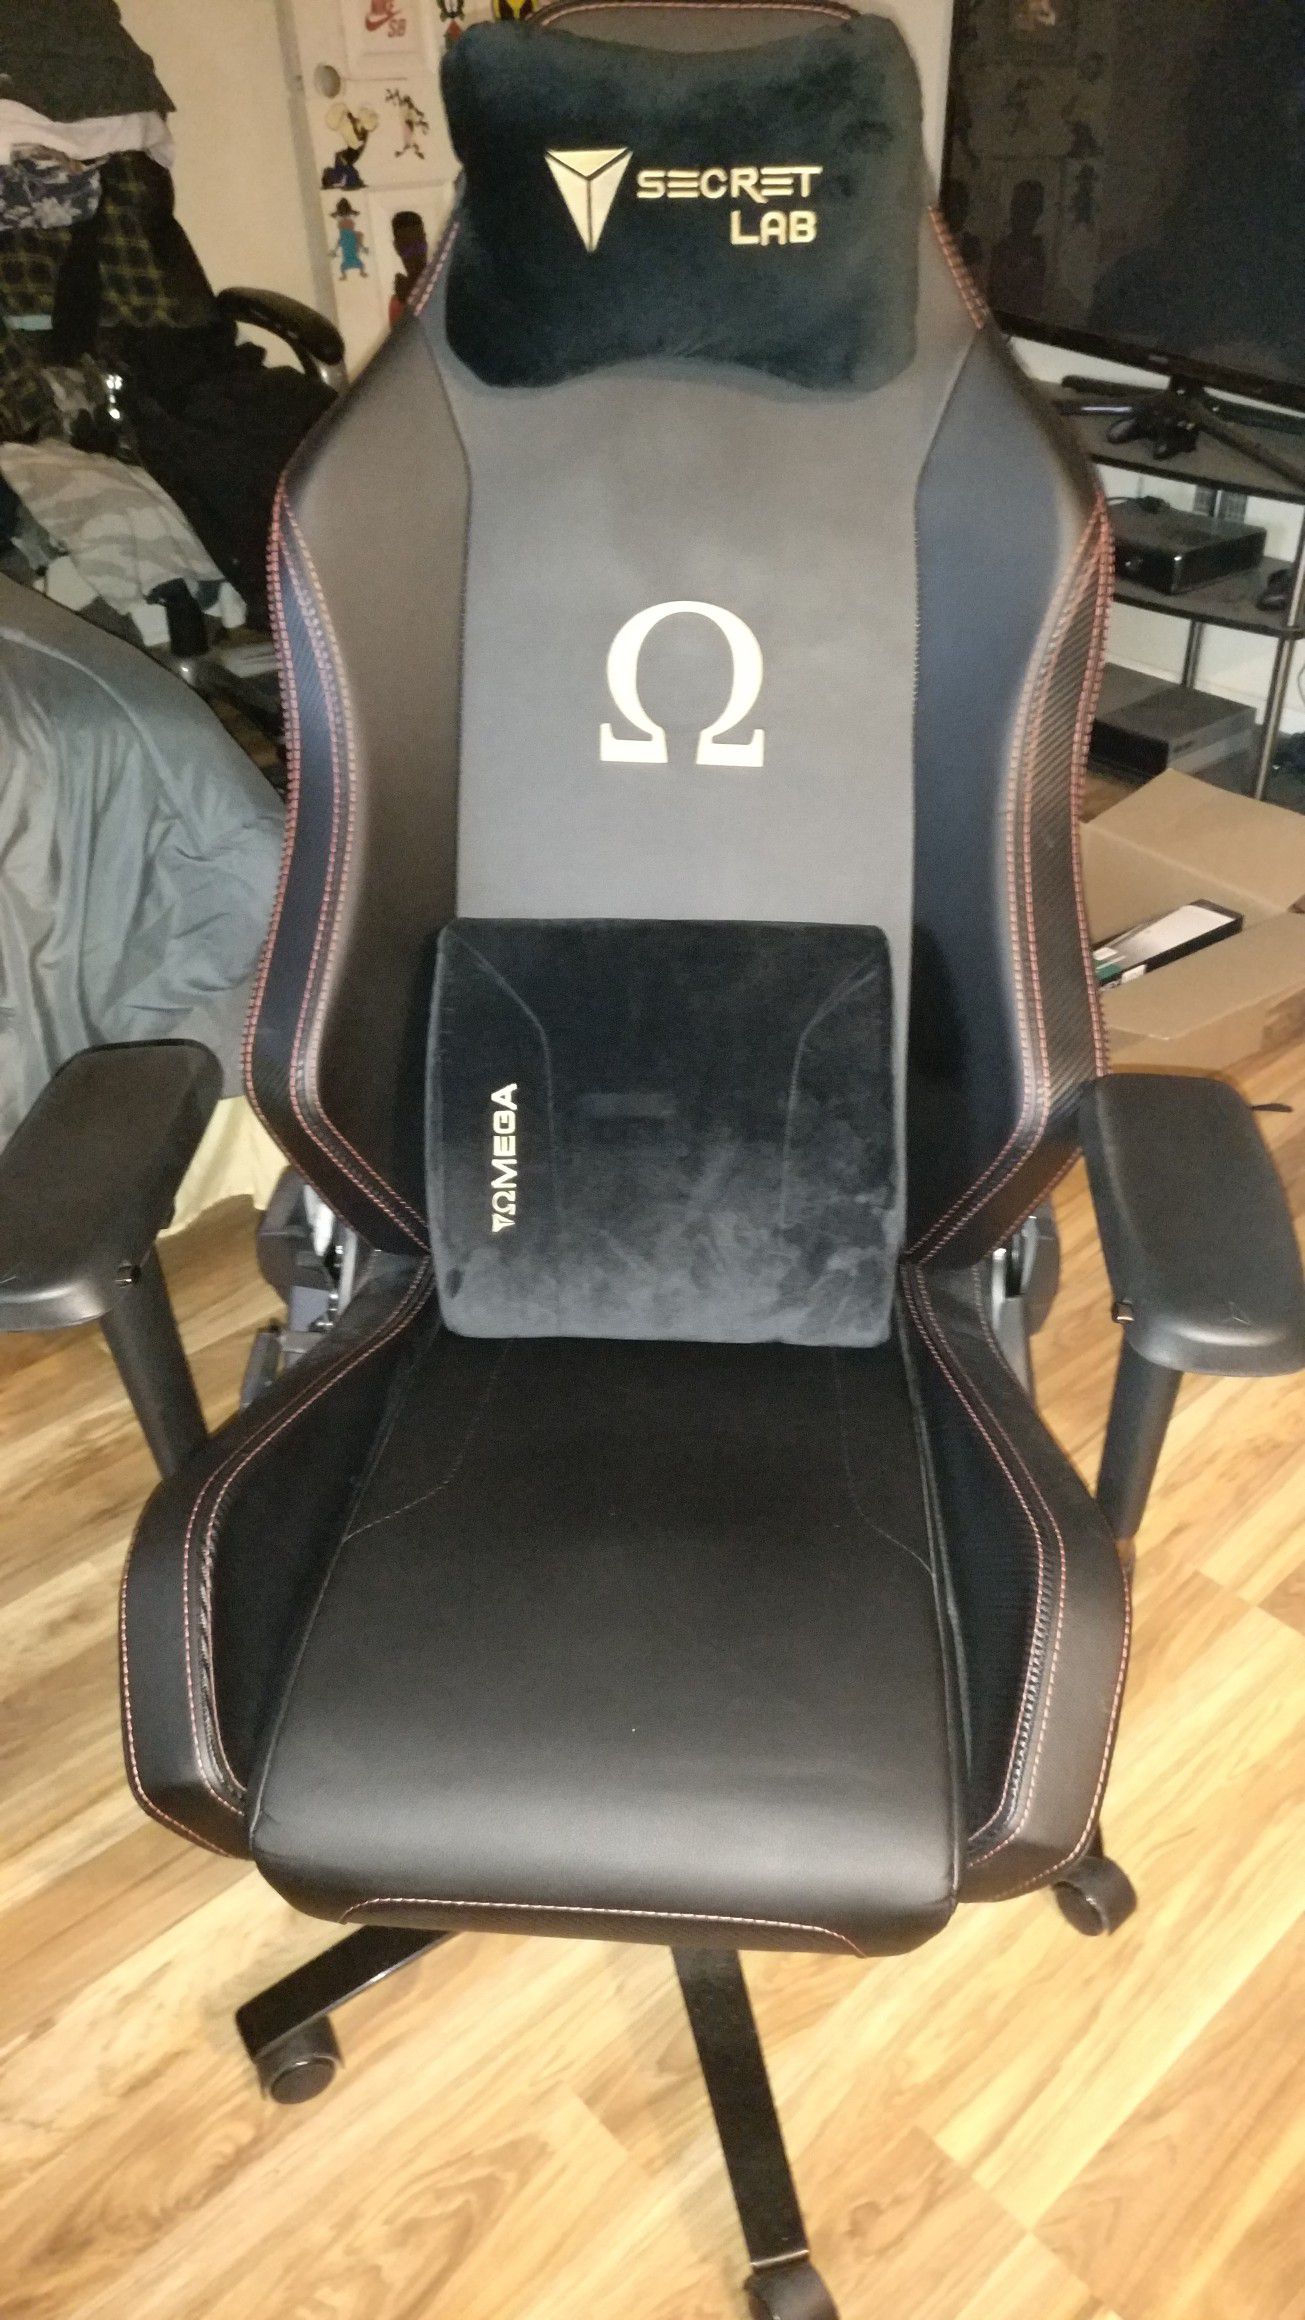 Secret Lab Omega Gaming Chair STEALTH Edition